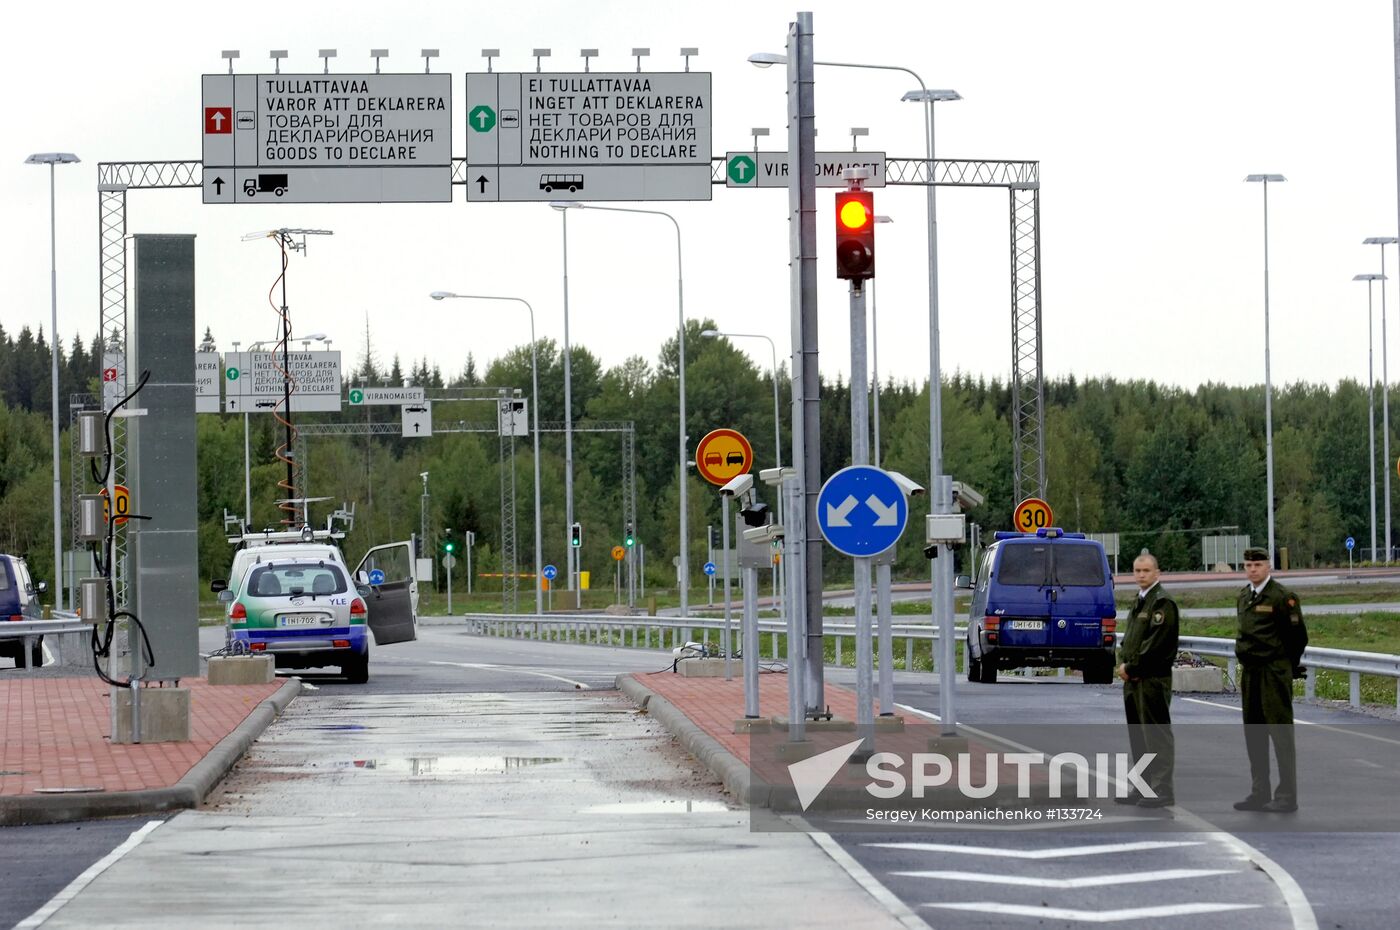 NEW ROAD AT RUSSO-FINNISH BORDER